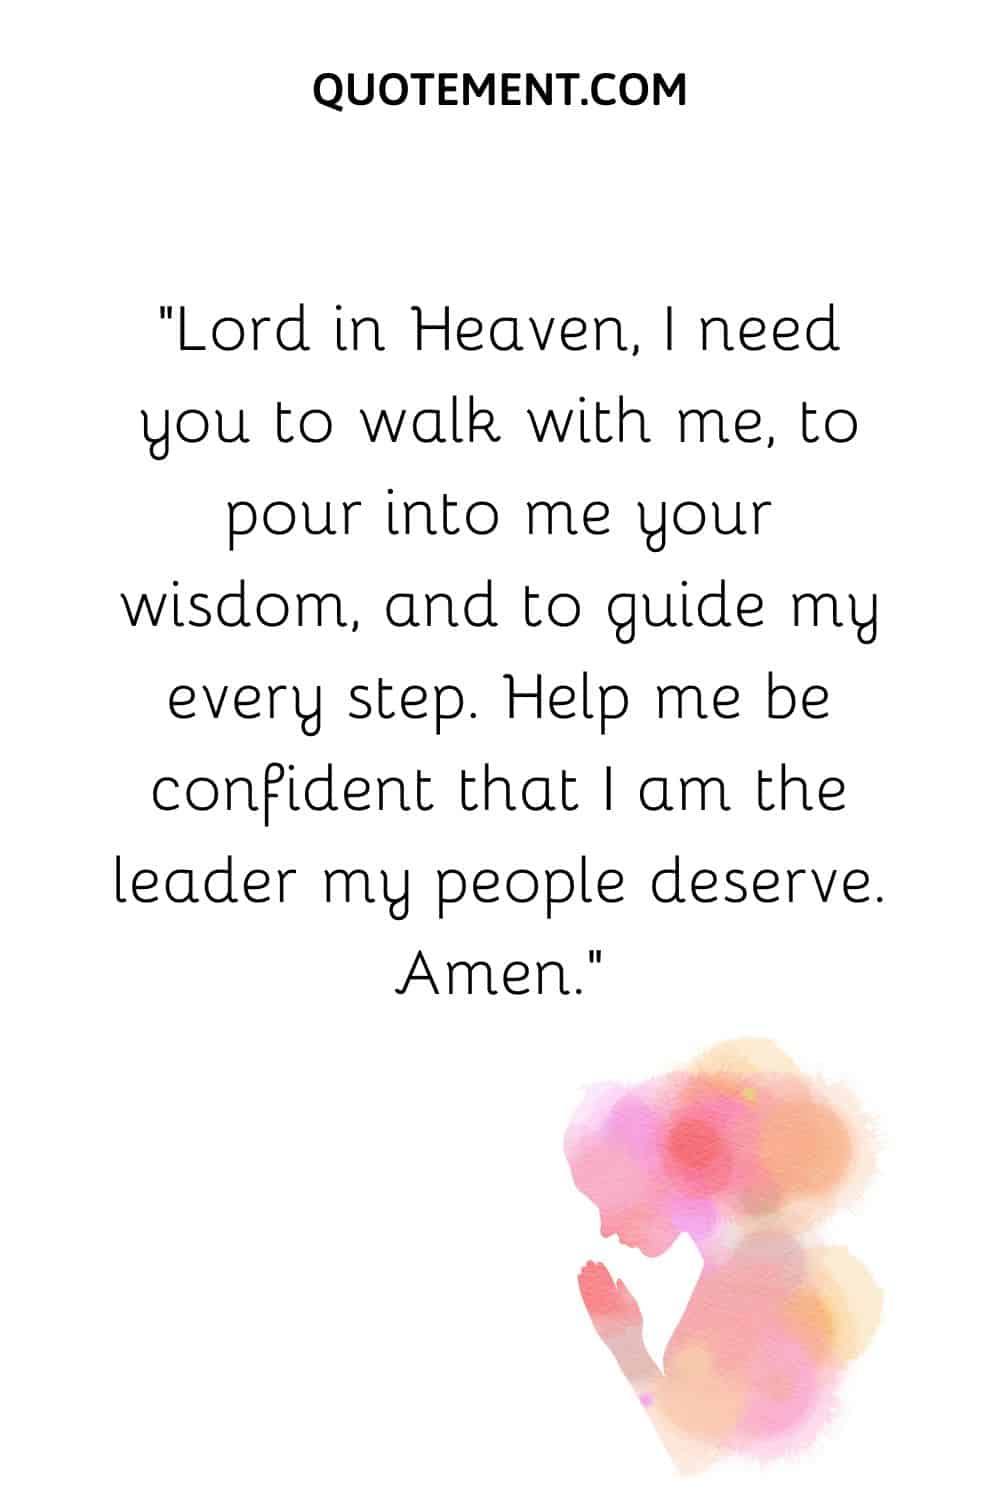 Lord in Heaven, I need you to walk with me, to pour into me your wisdom, and to guide my every step